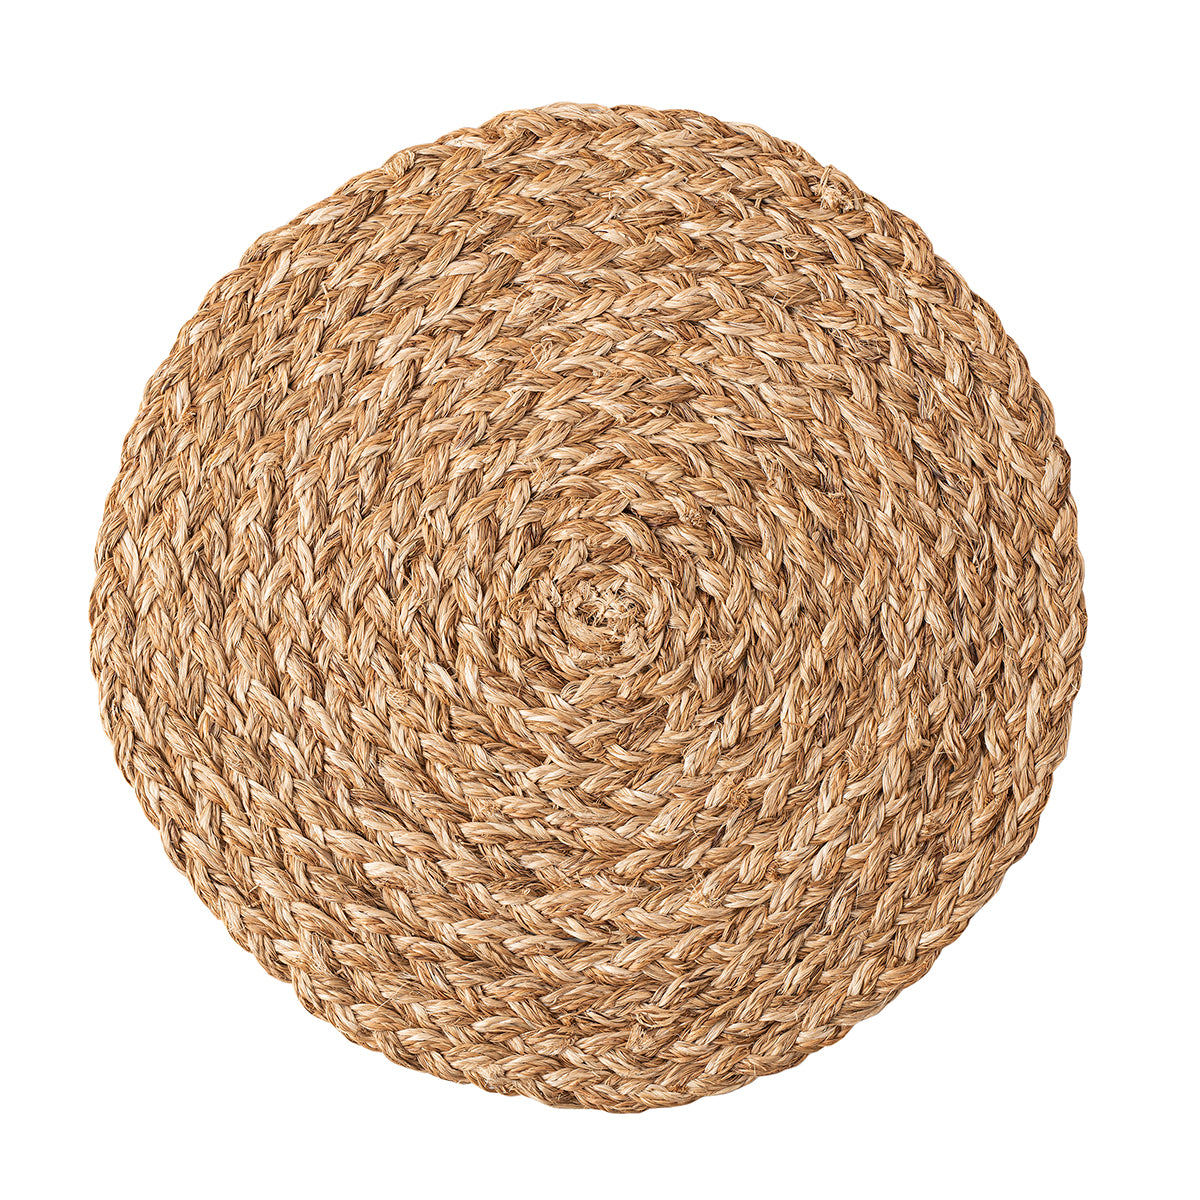 Woven Straw Placemat - Natural